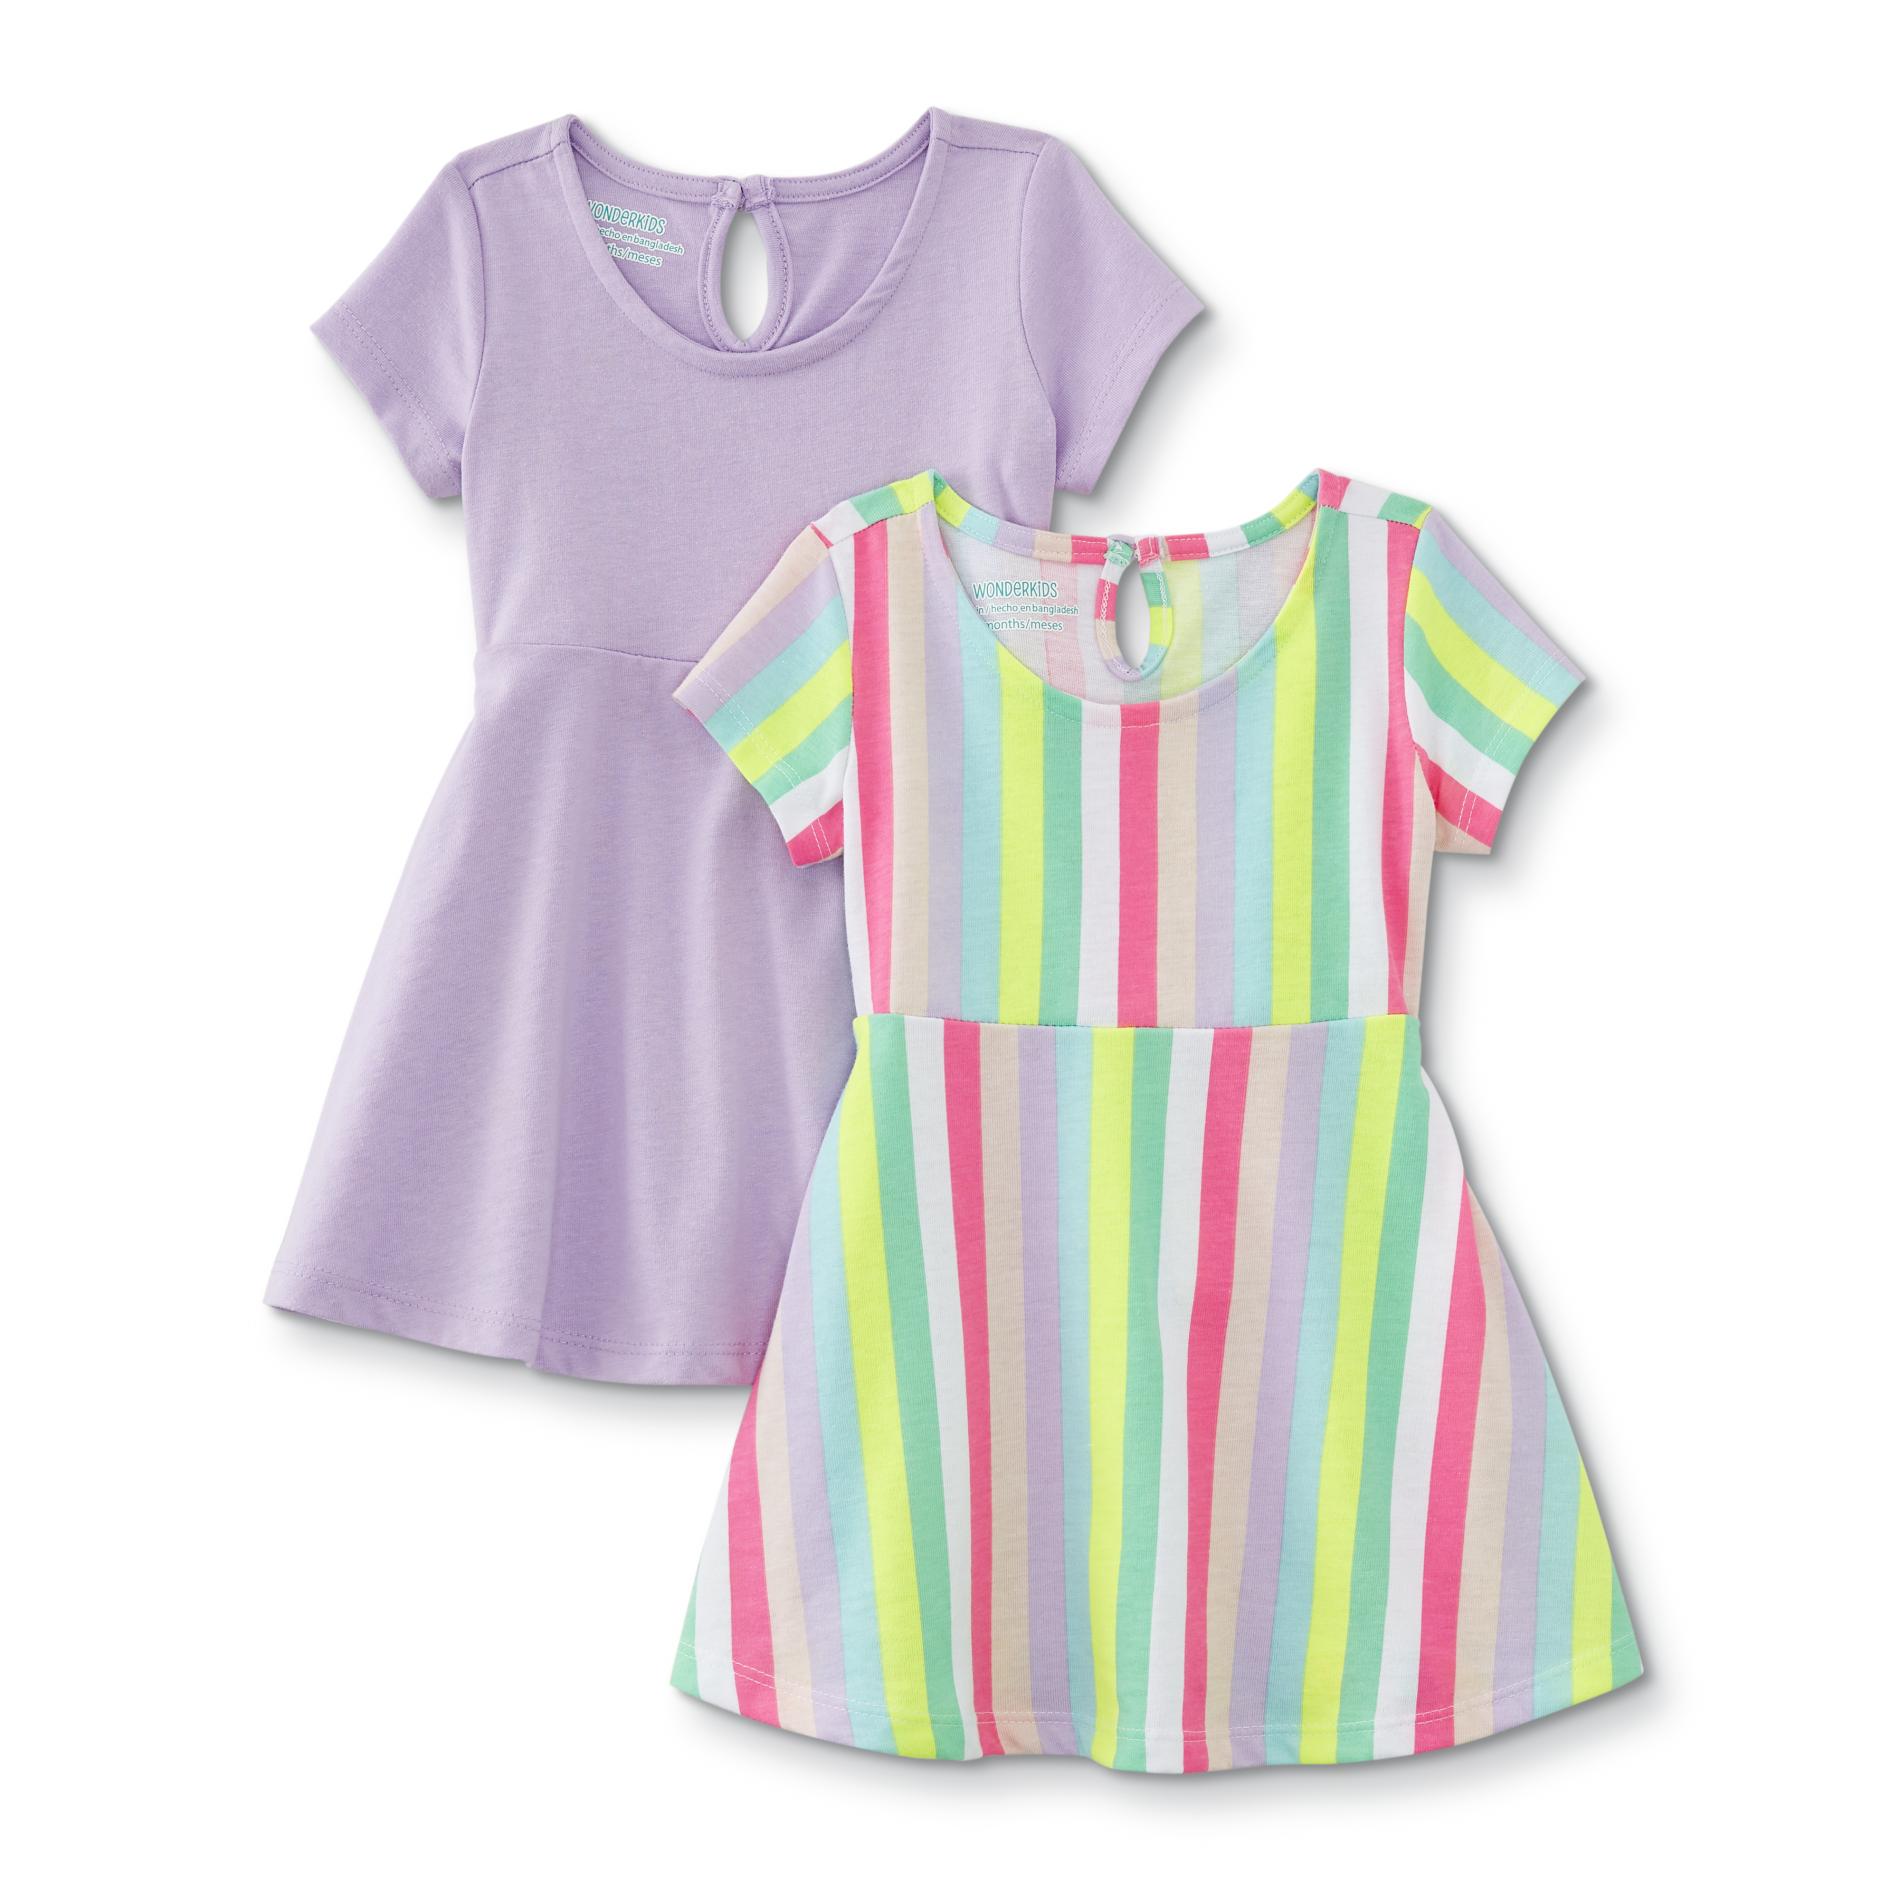 kmart baby girl clothes